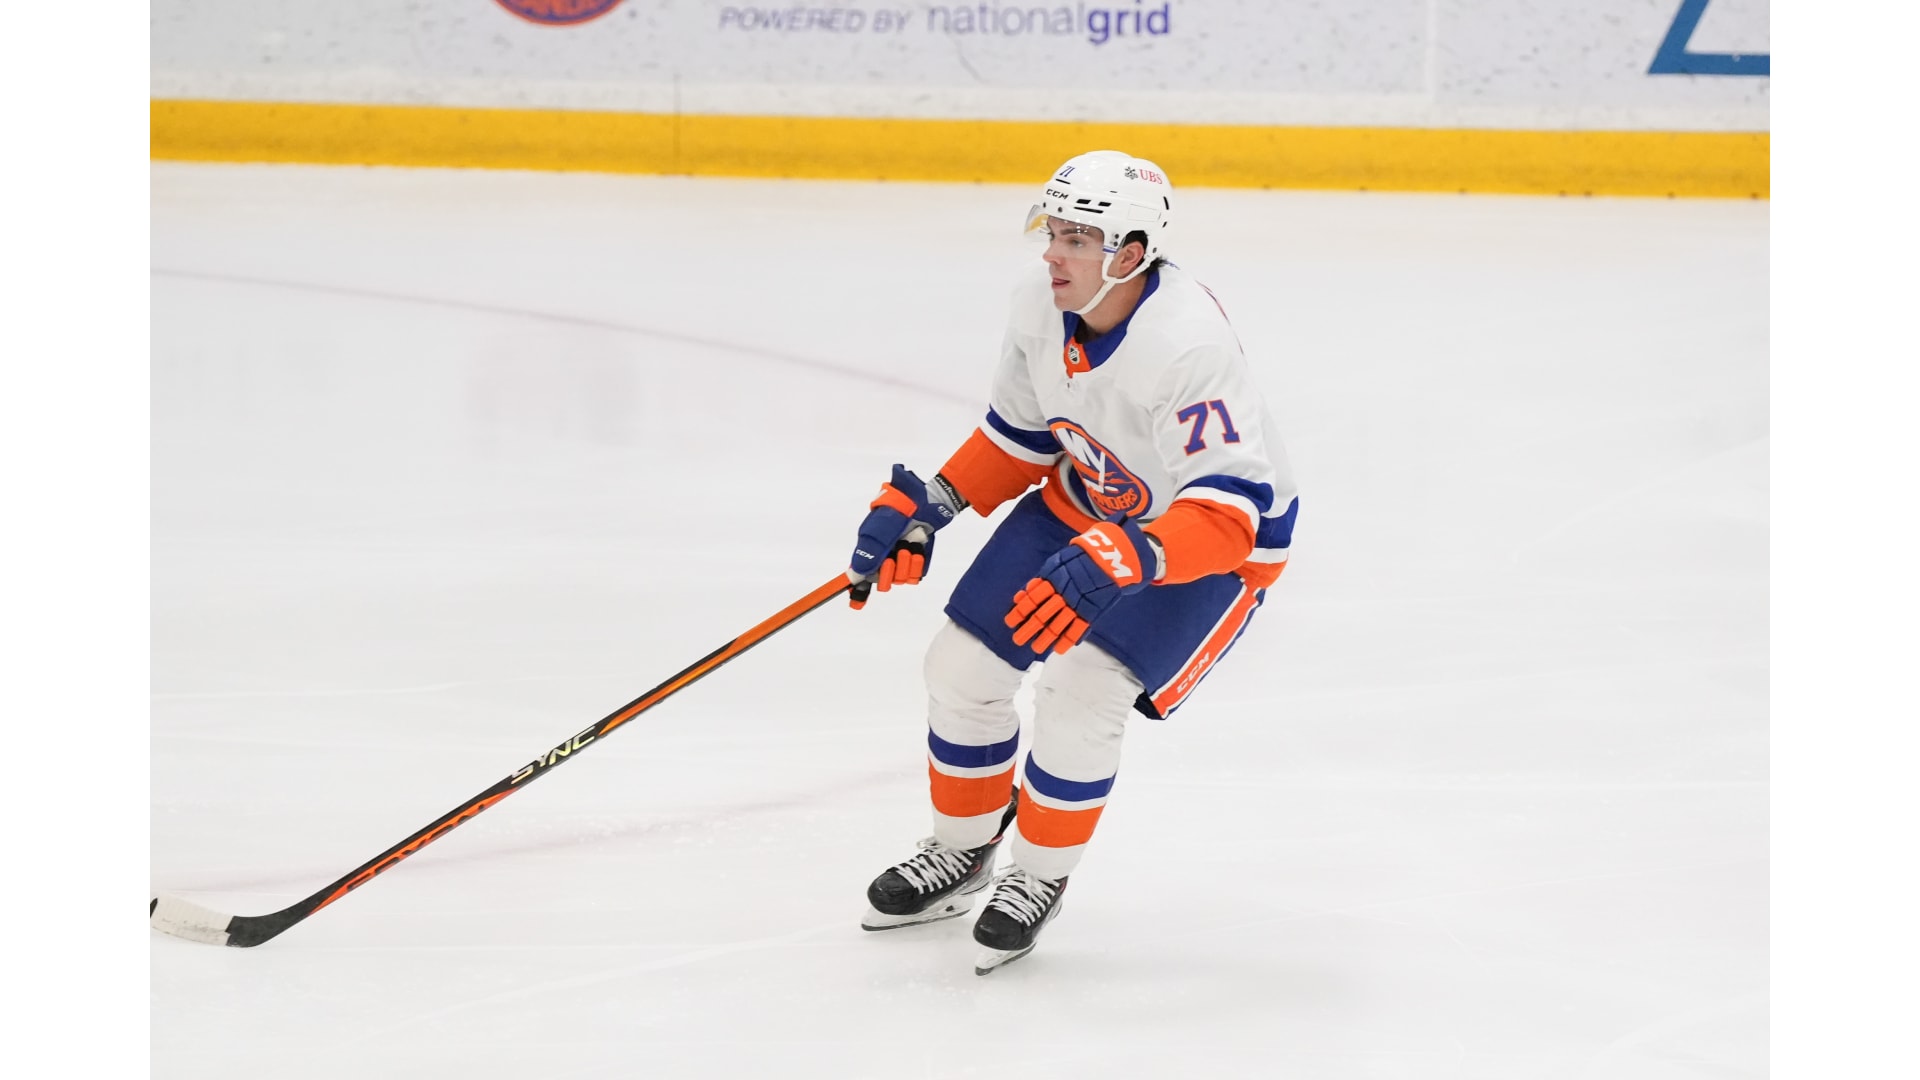 Rosner Wrap: Islanders Training Camp Time, Hague Not at Golden Knights Camp  - New York Islanders Hockey Now